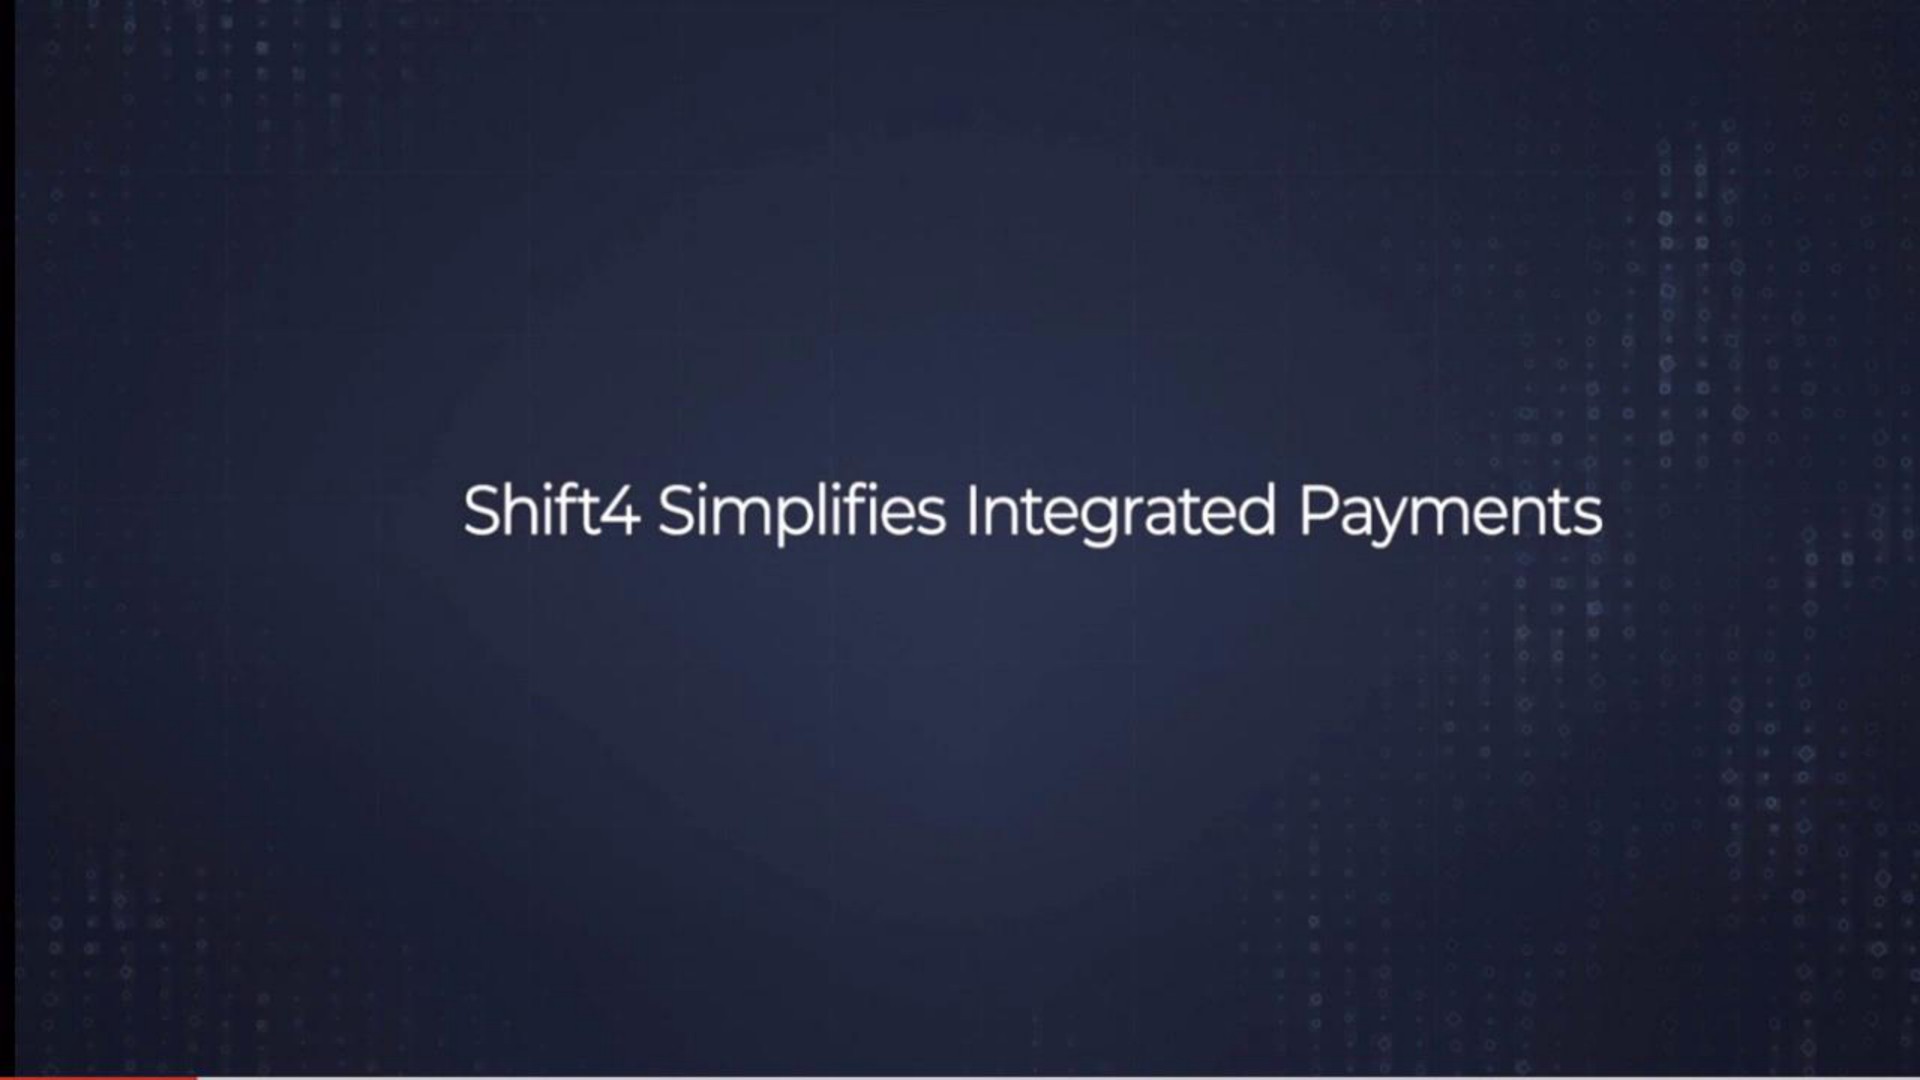 shift simplifies integrated payments | Shift4